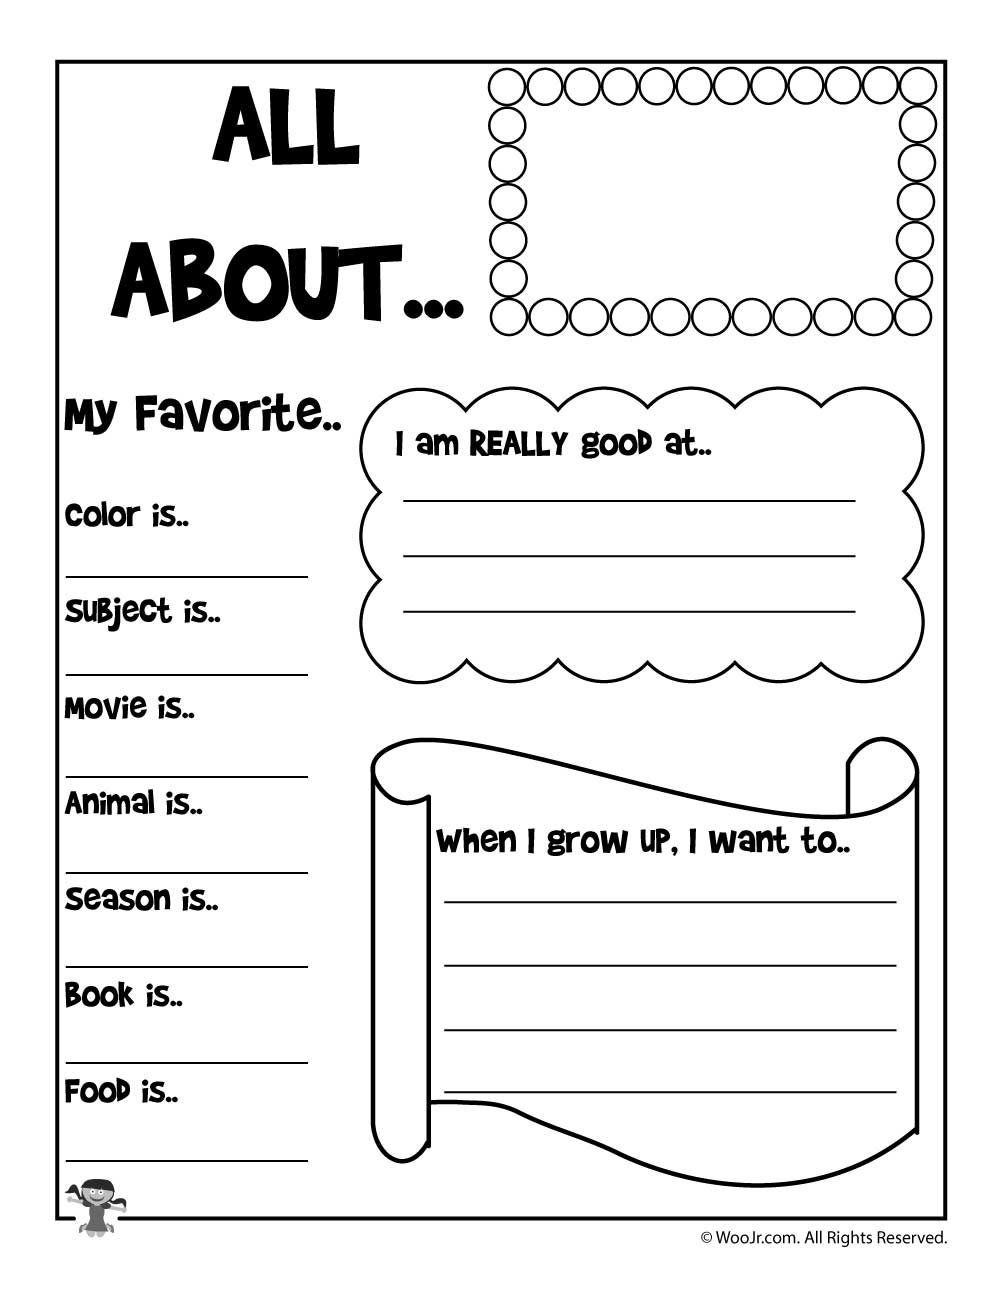 all-about-me-children-s-worksheet-all-about-me-worksheets